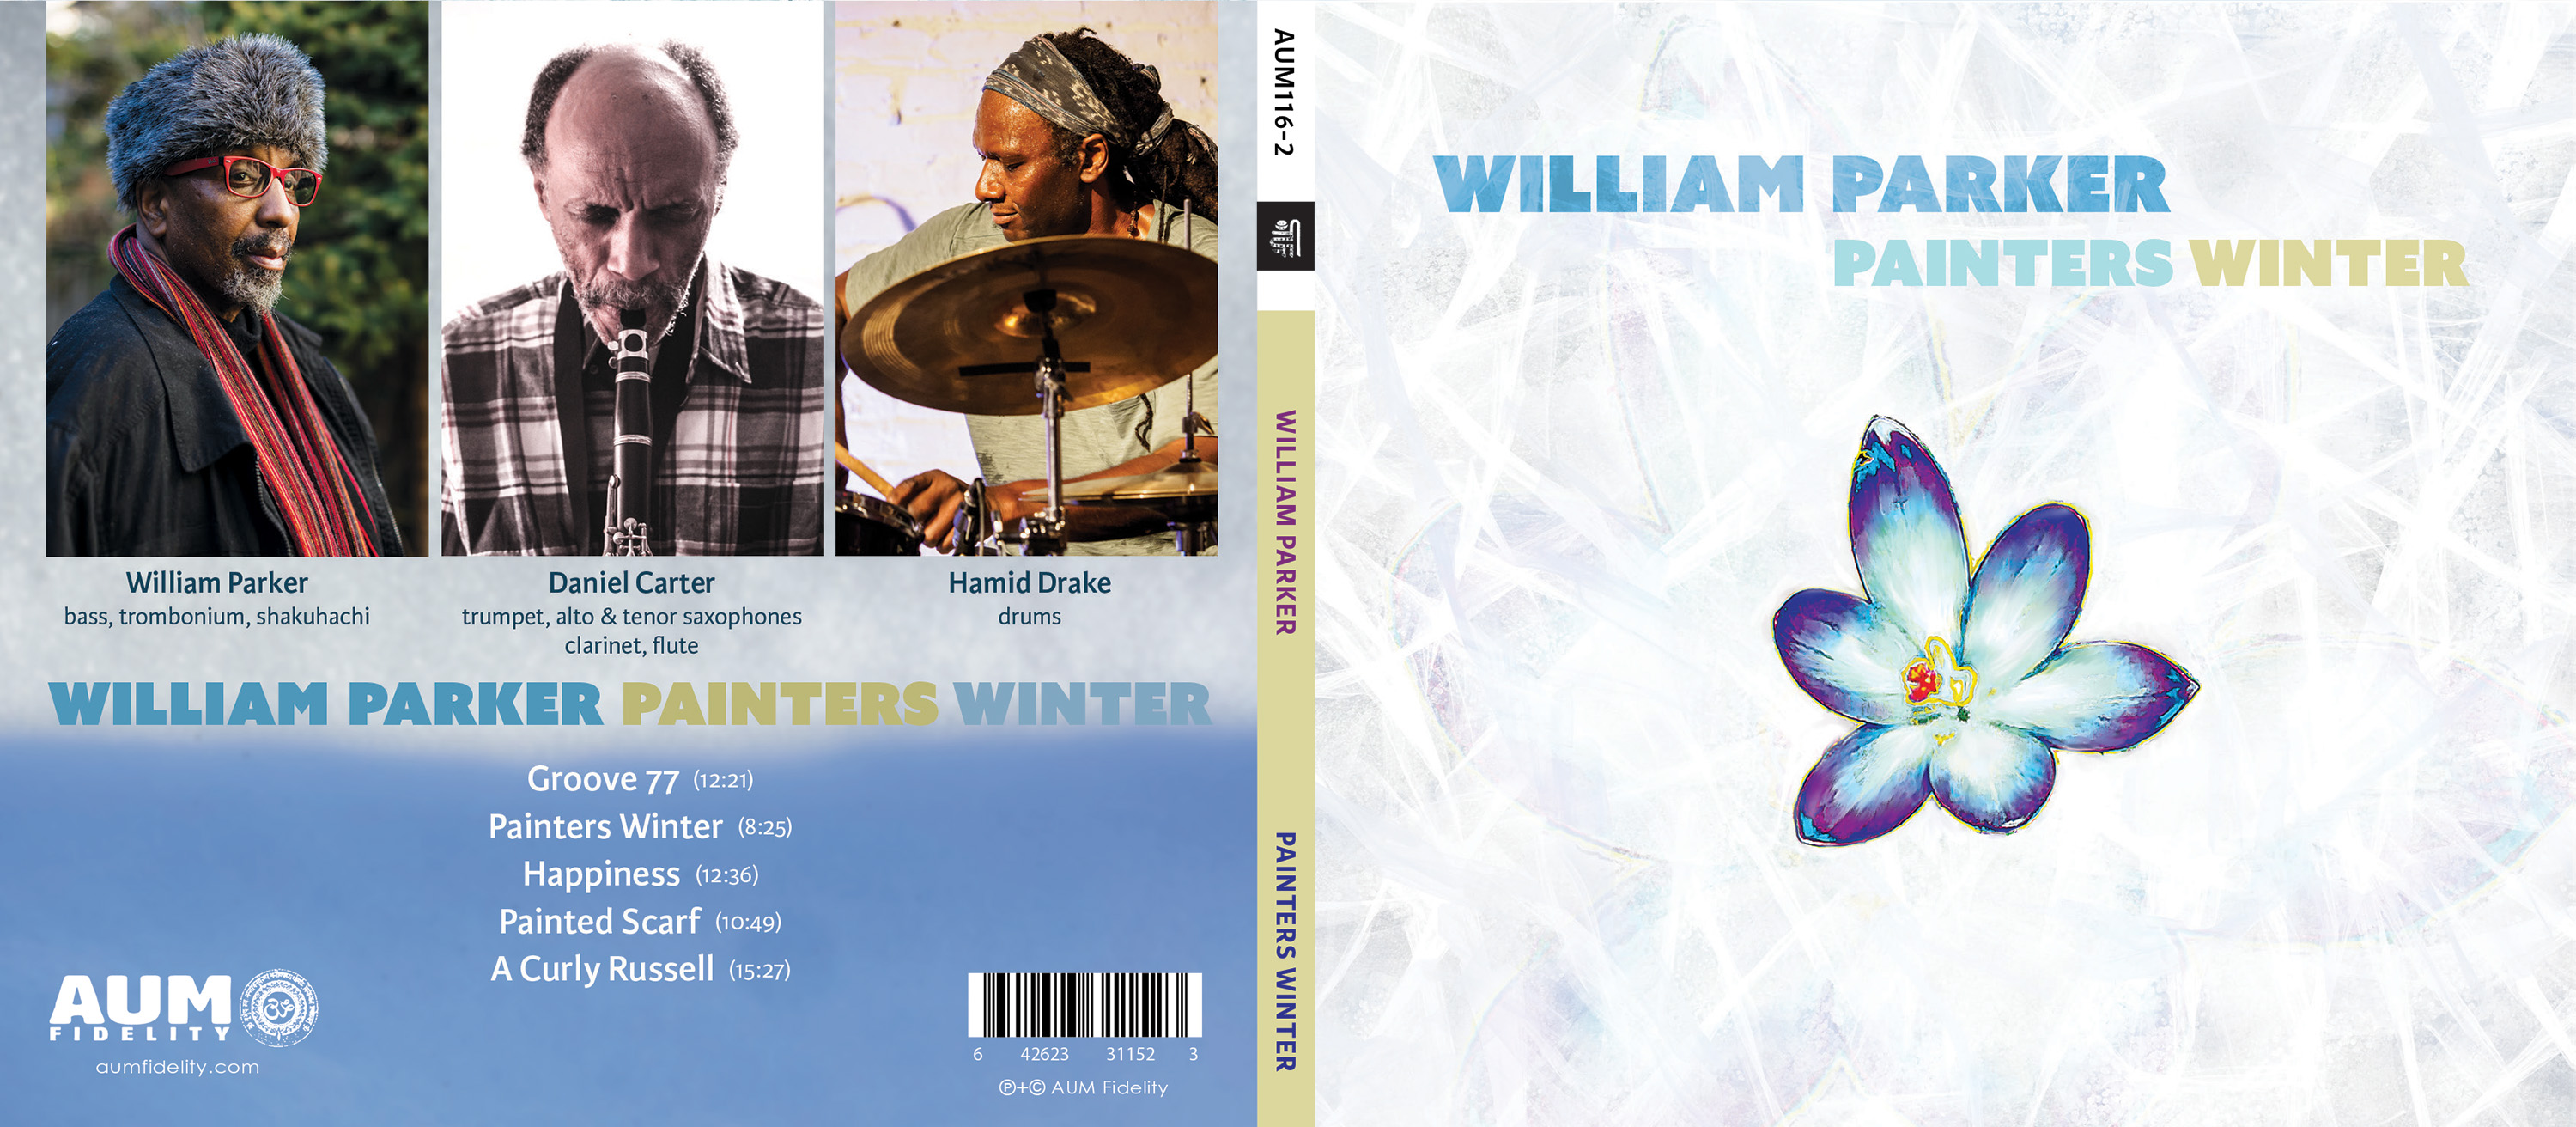 cd front (r) and back (l) cover for Painters Winter by William Parker